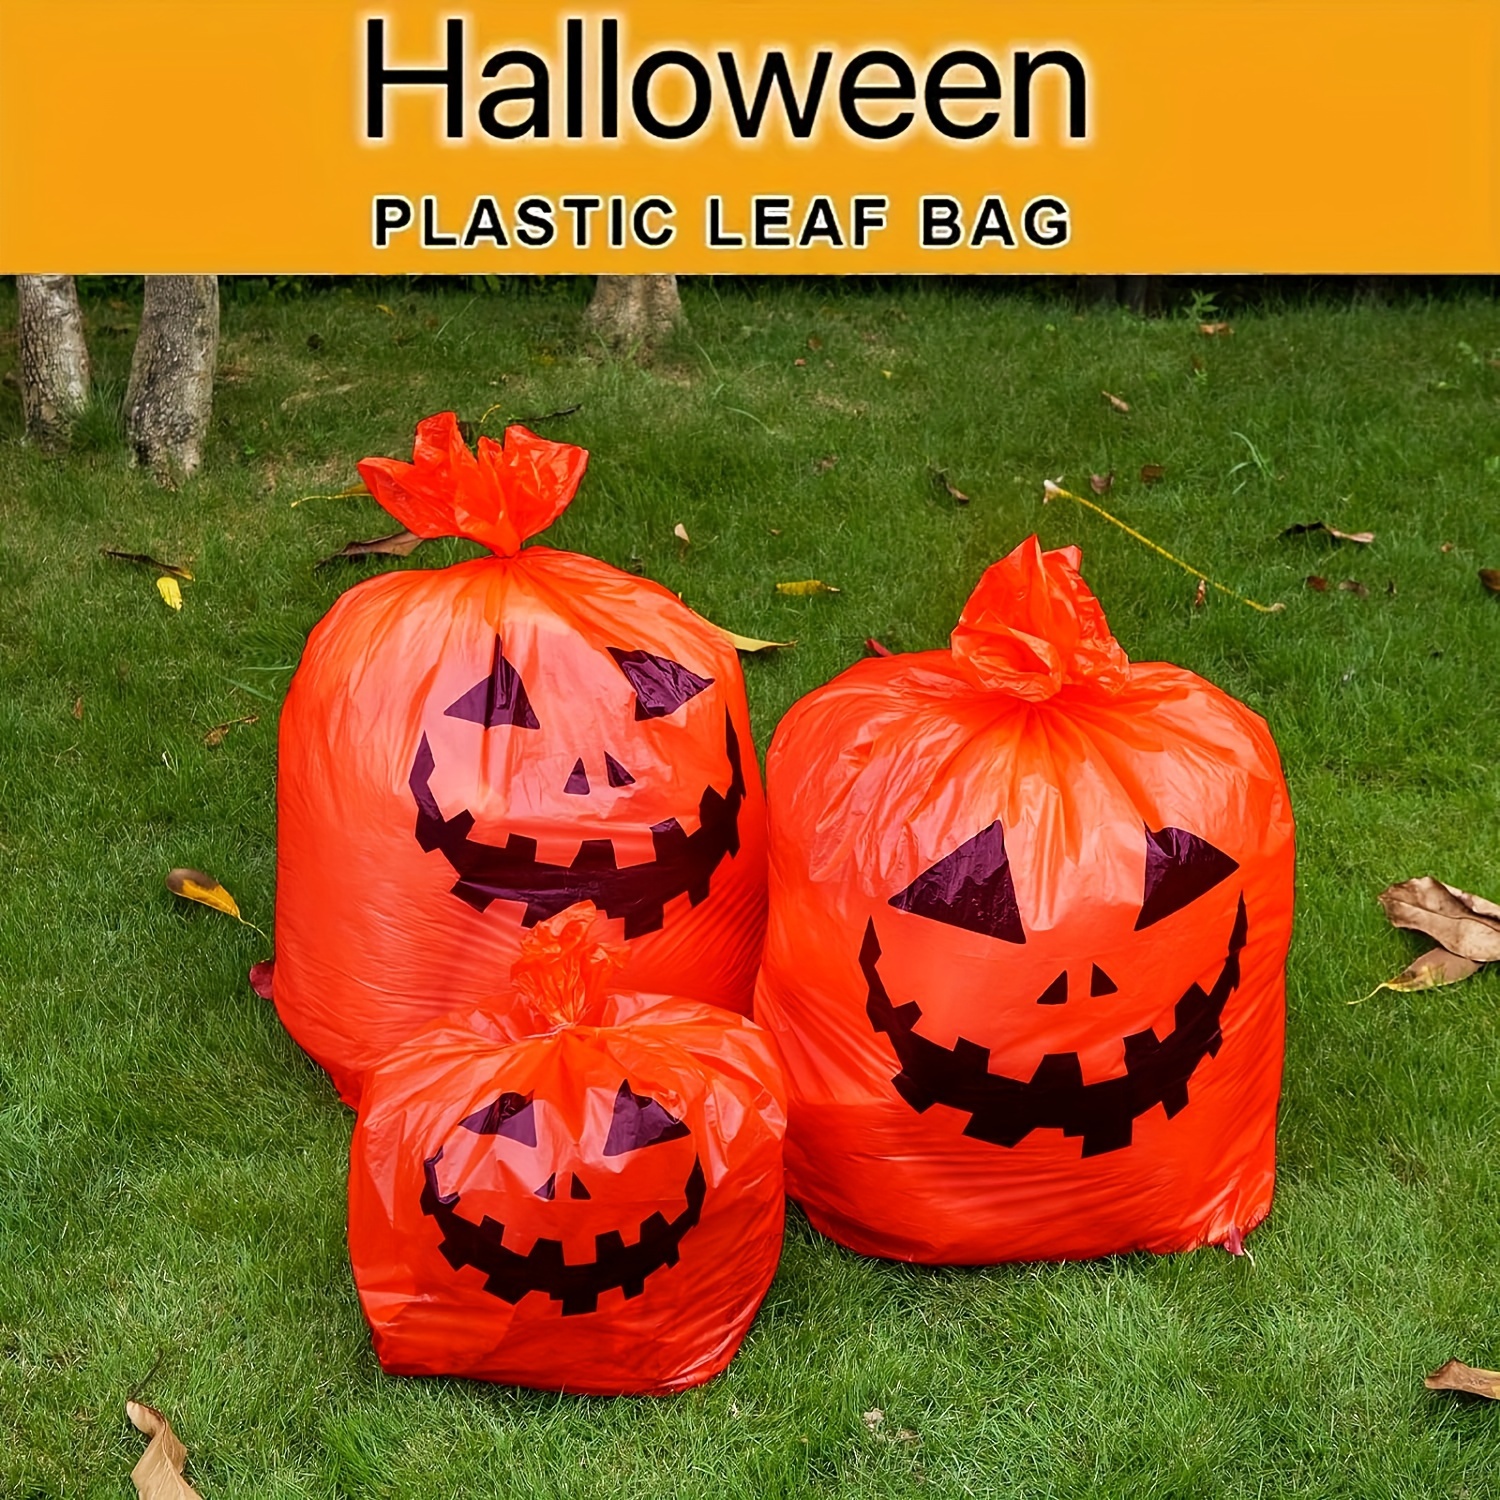 Plastic Garbage Leaf Bags, Plastic Party Props